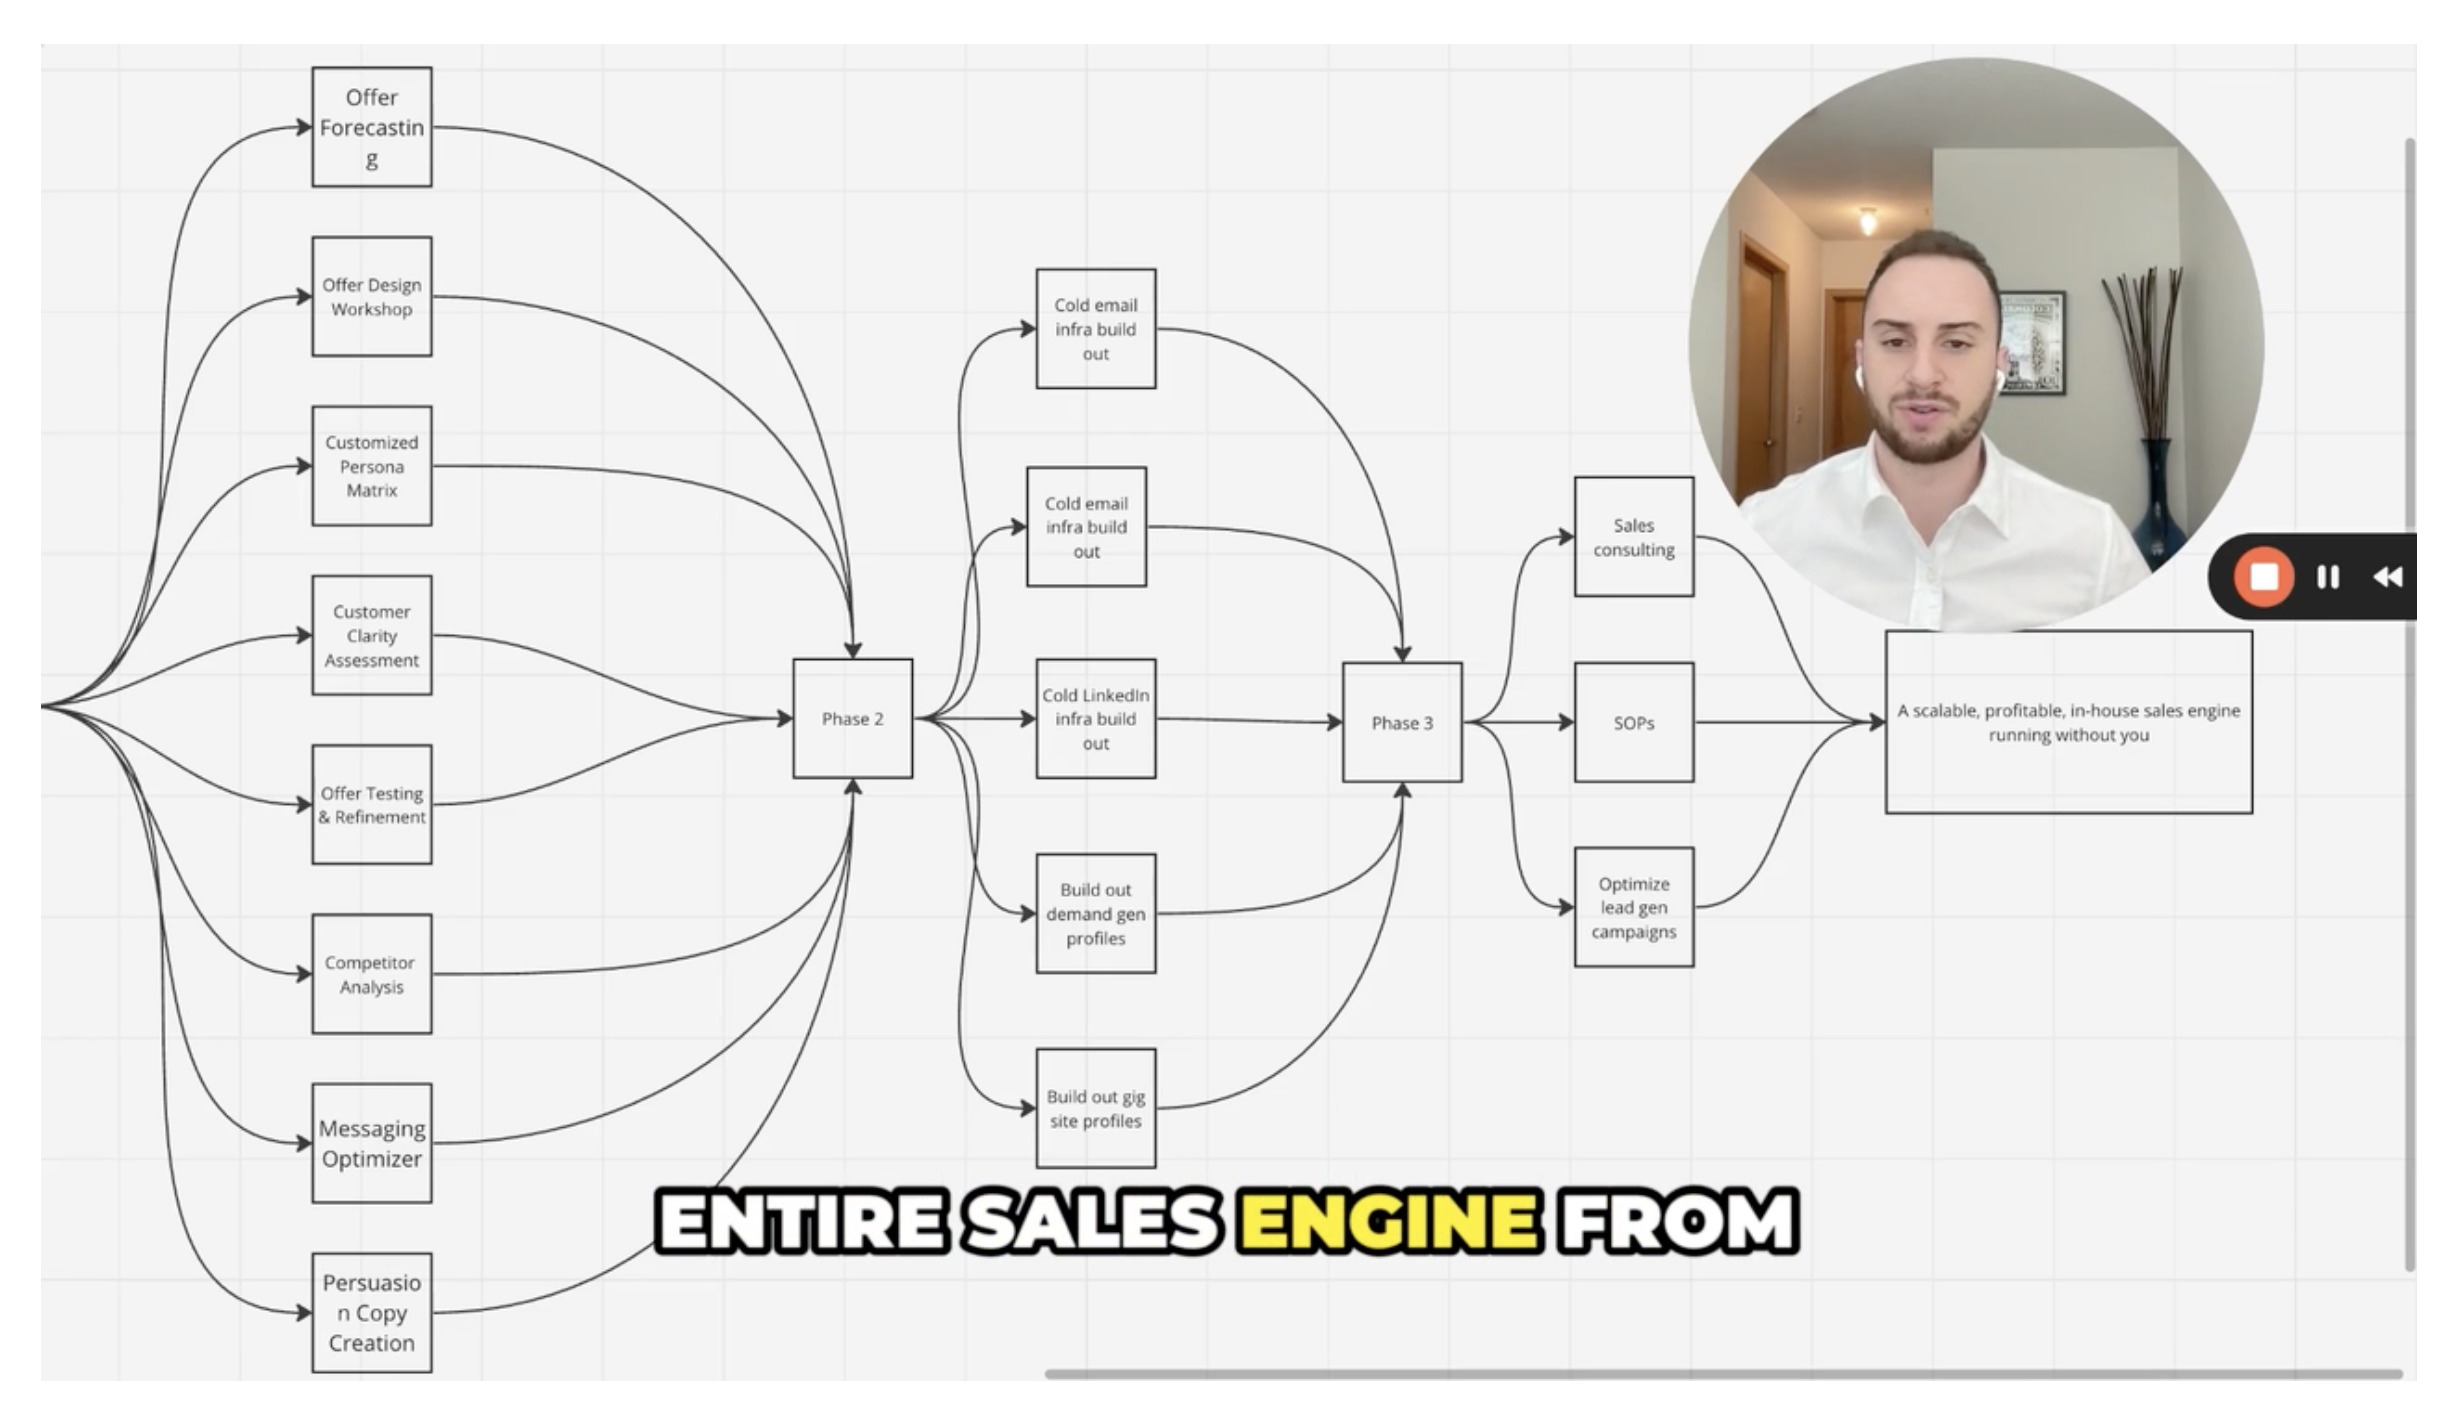 SocialBloom founder explains how to build a sales engine.